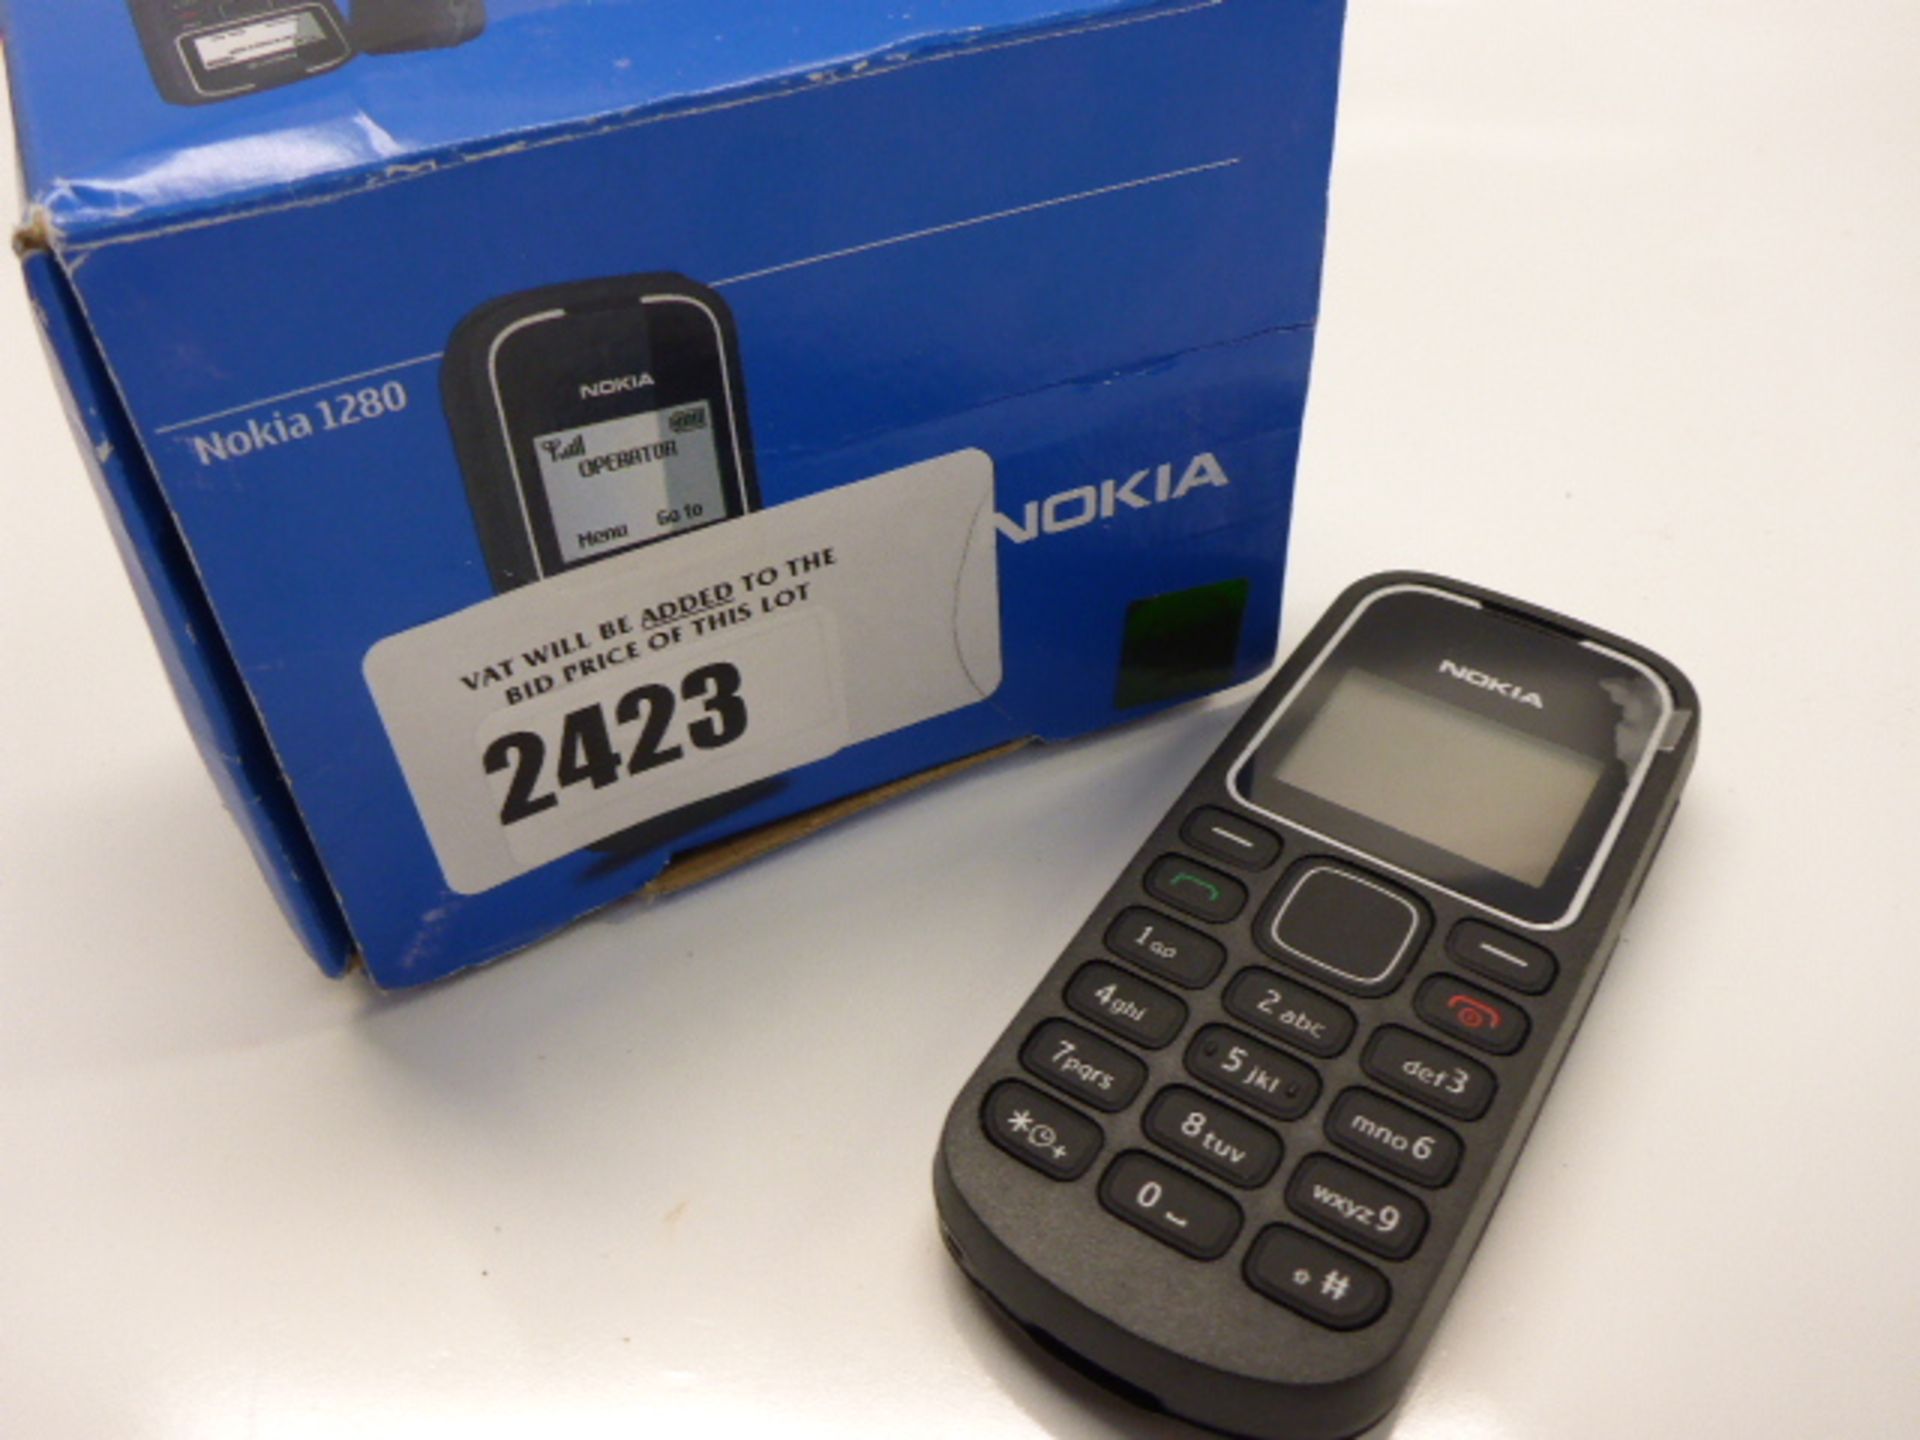 Nokia 1280 mobile phone with box.